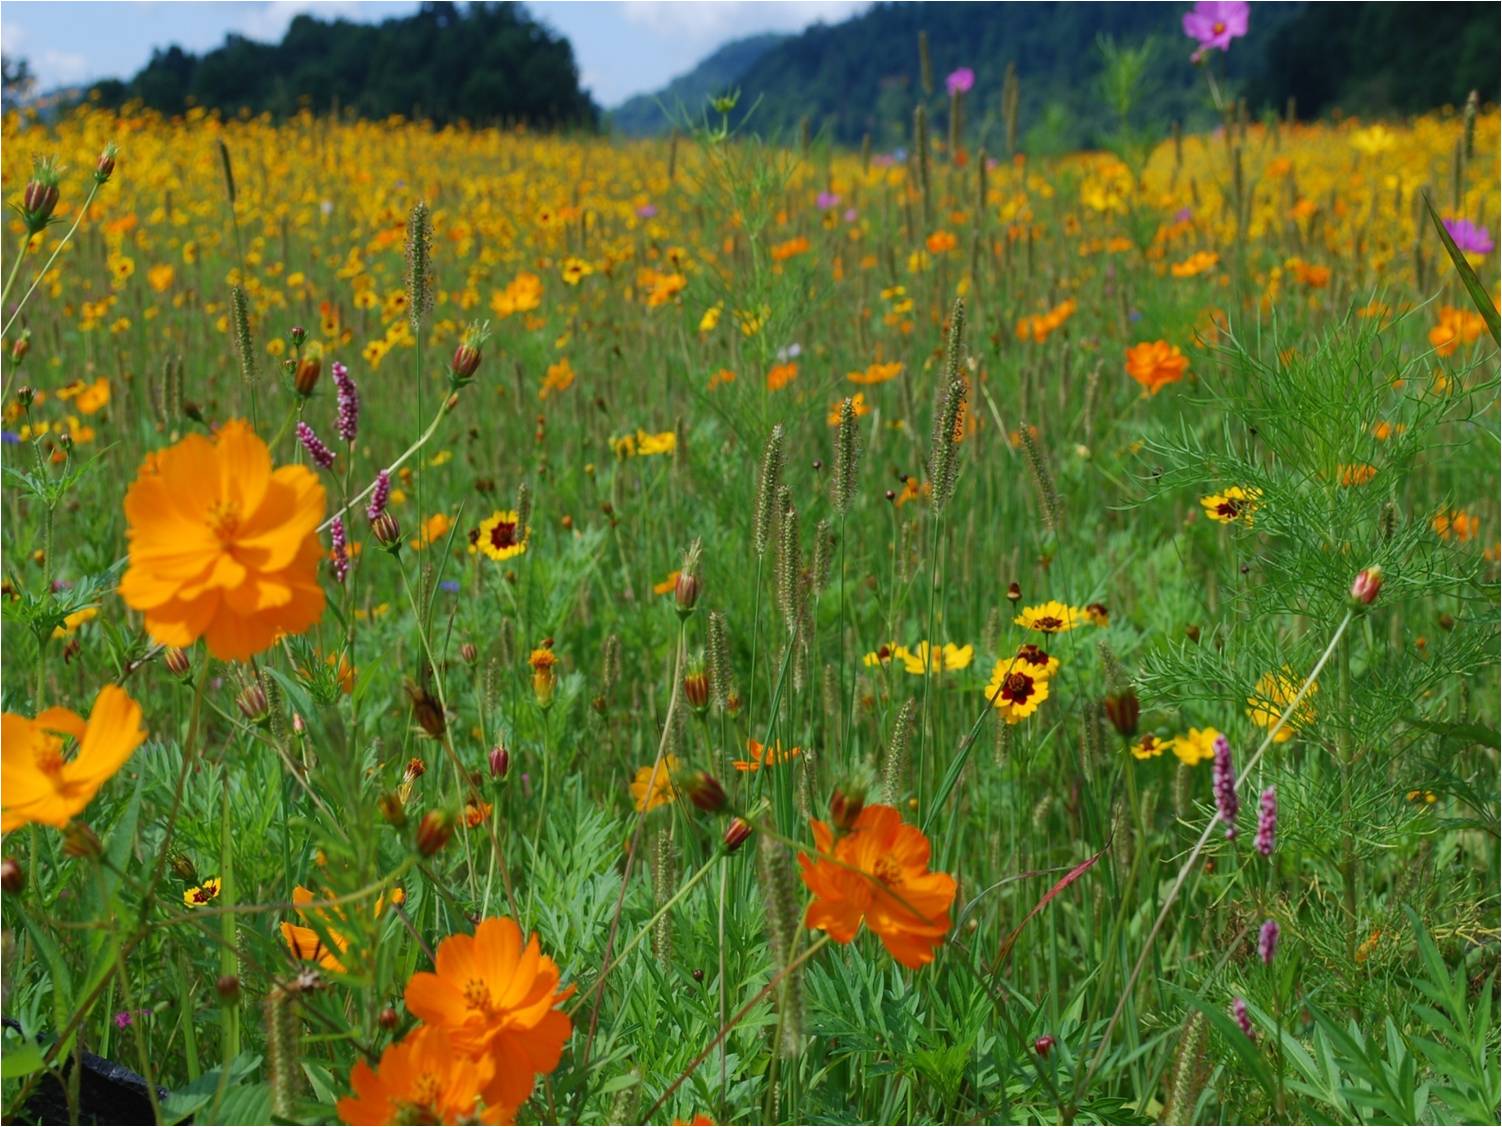 Orange and yellow wildflowers in a field on a sunny day.